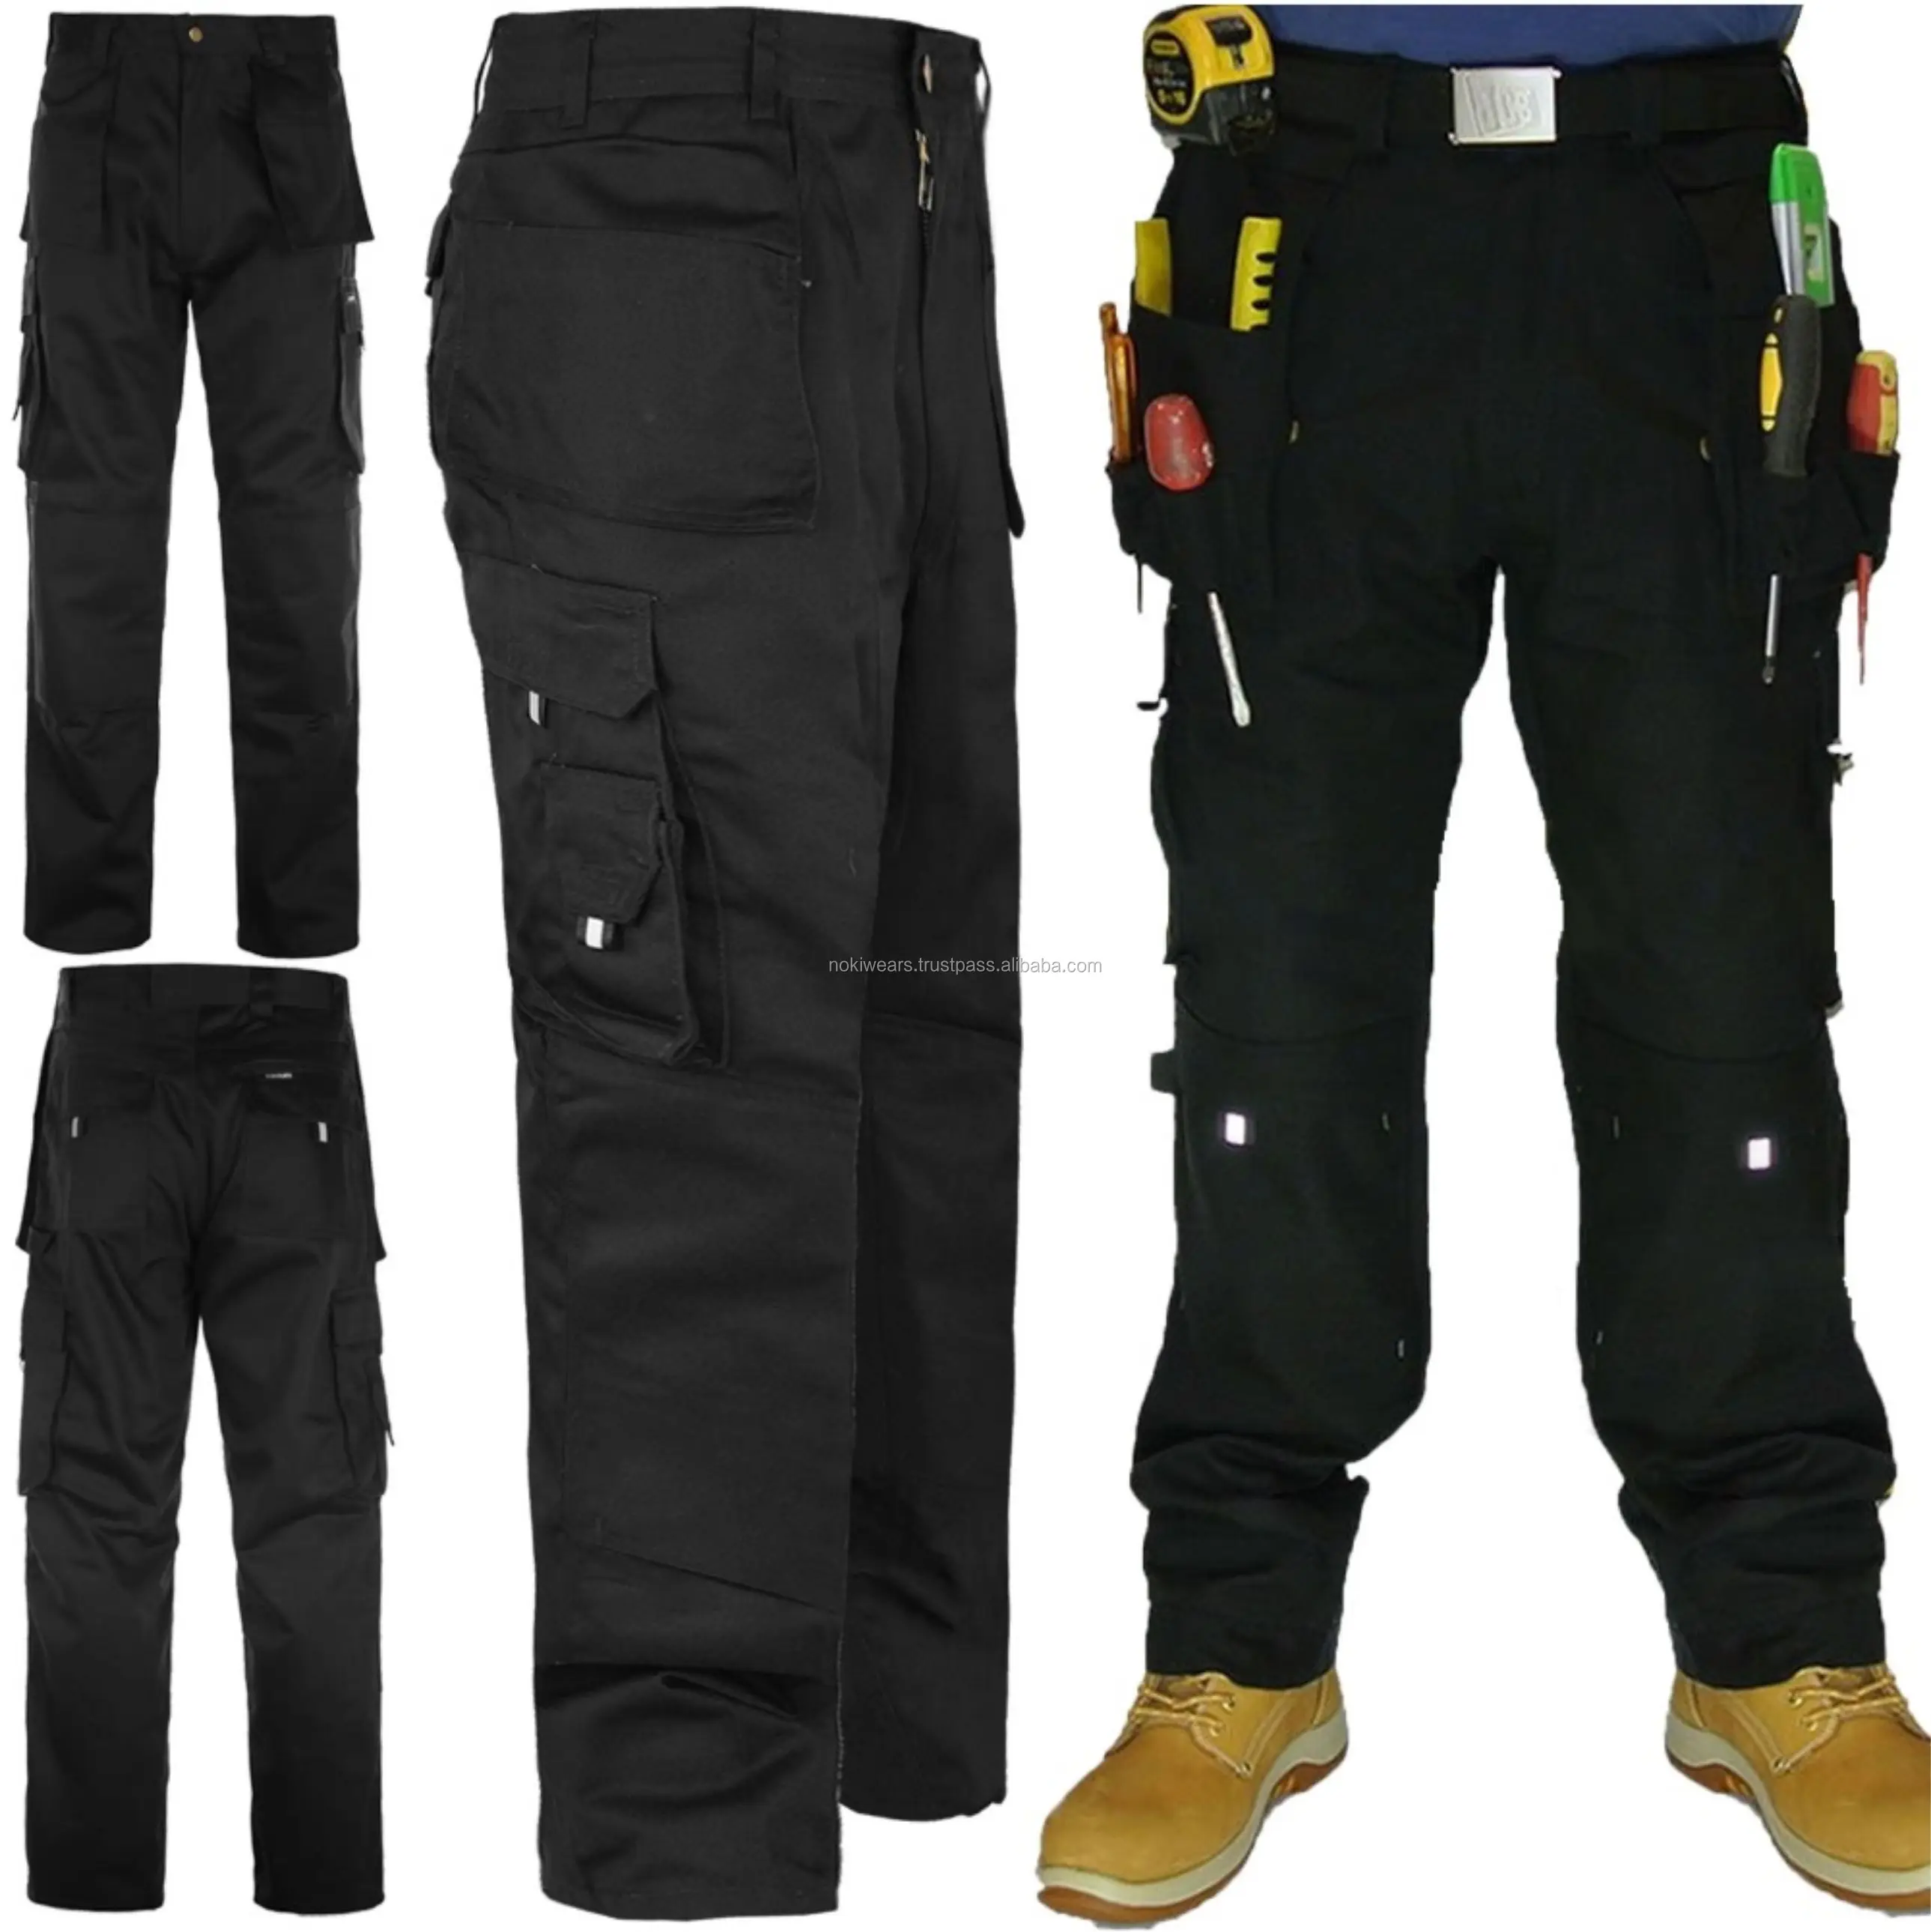 NS NEW WORK TROUSERS Cargo MENS Combat Style Multi Pockets Heavy Duty KNEE PADS 